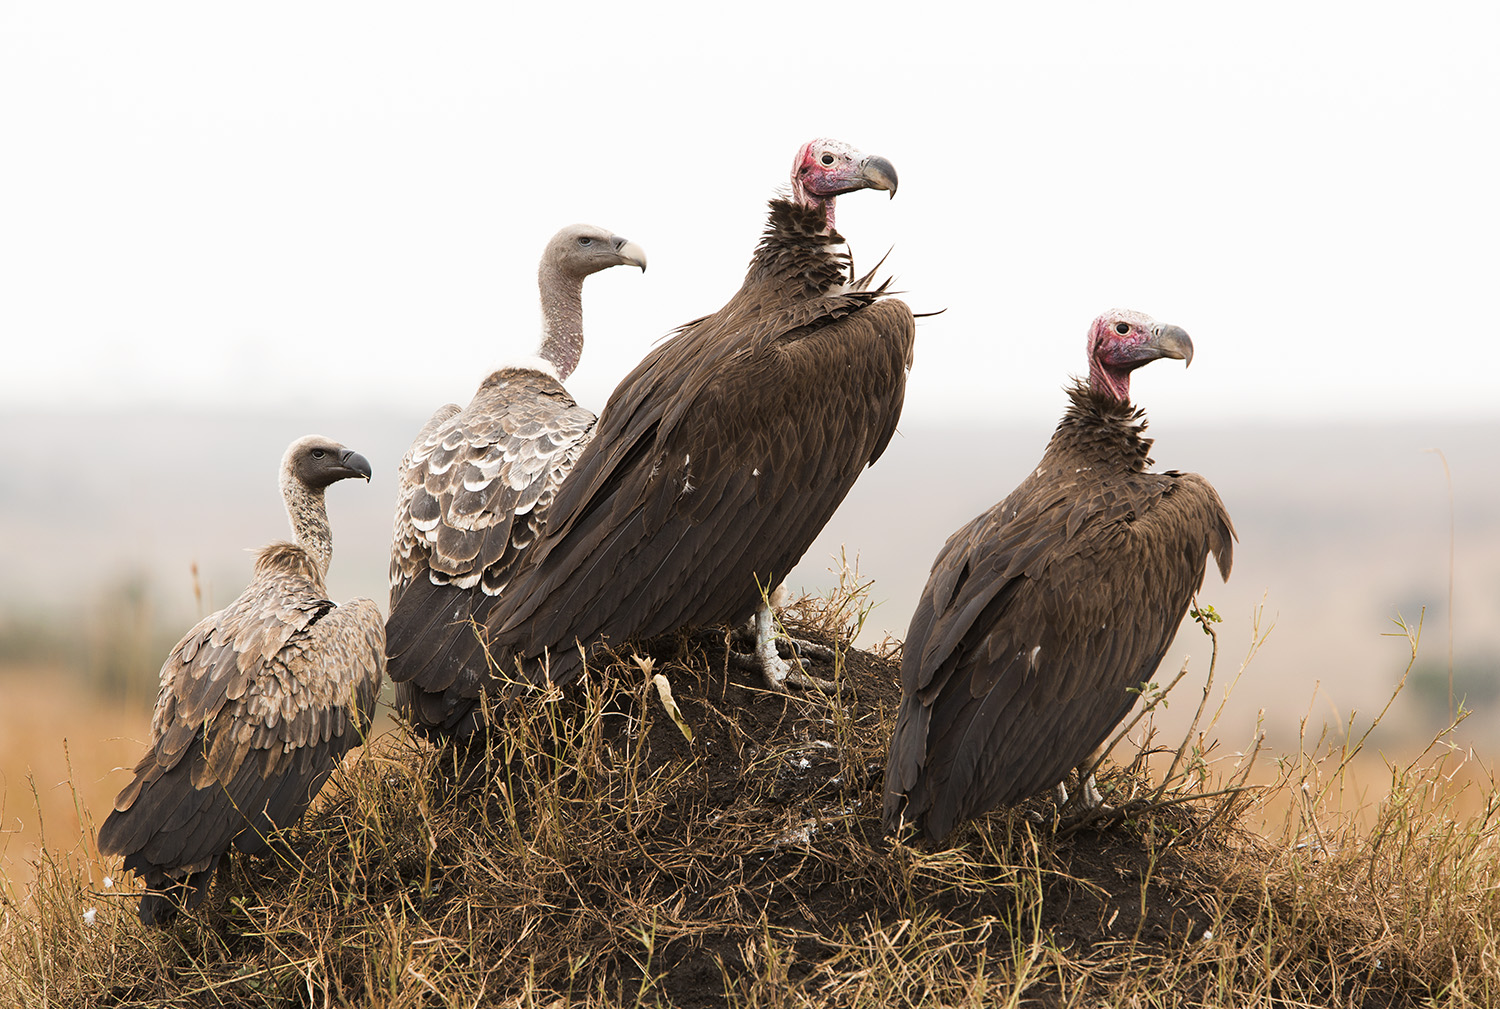 Vultures on a mound